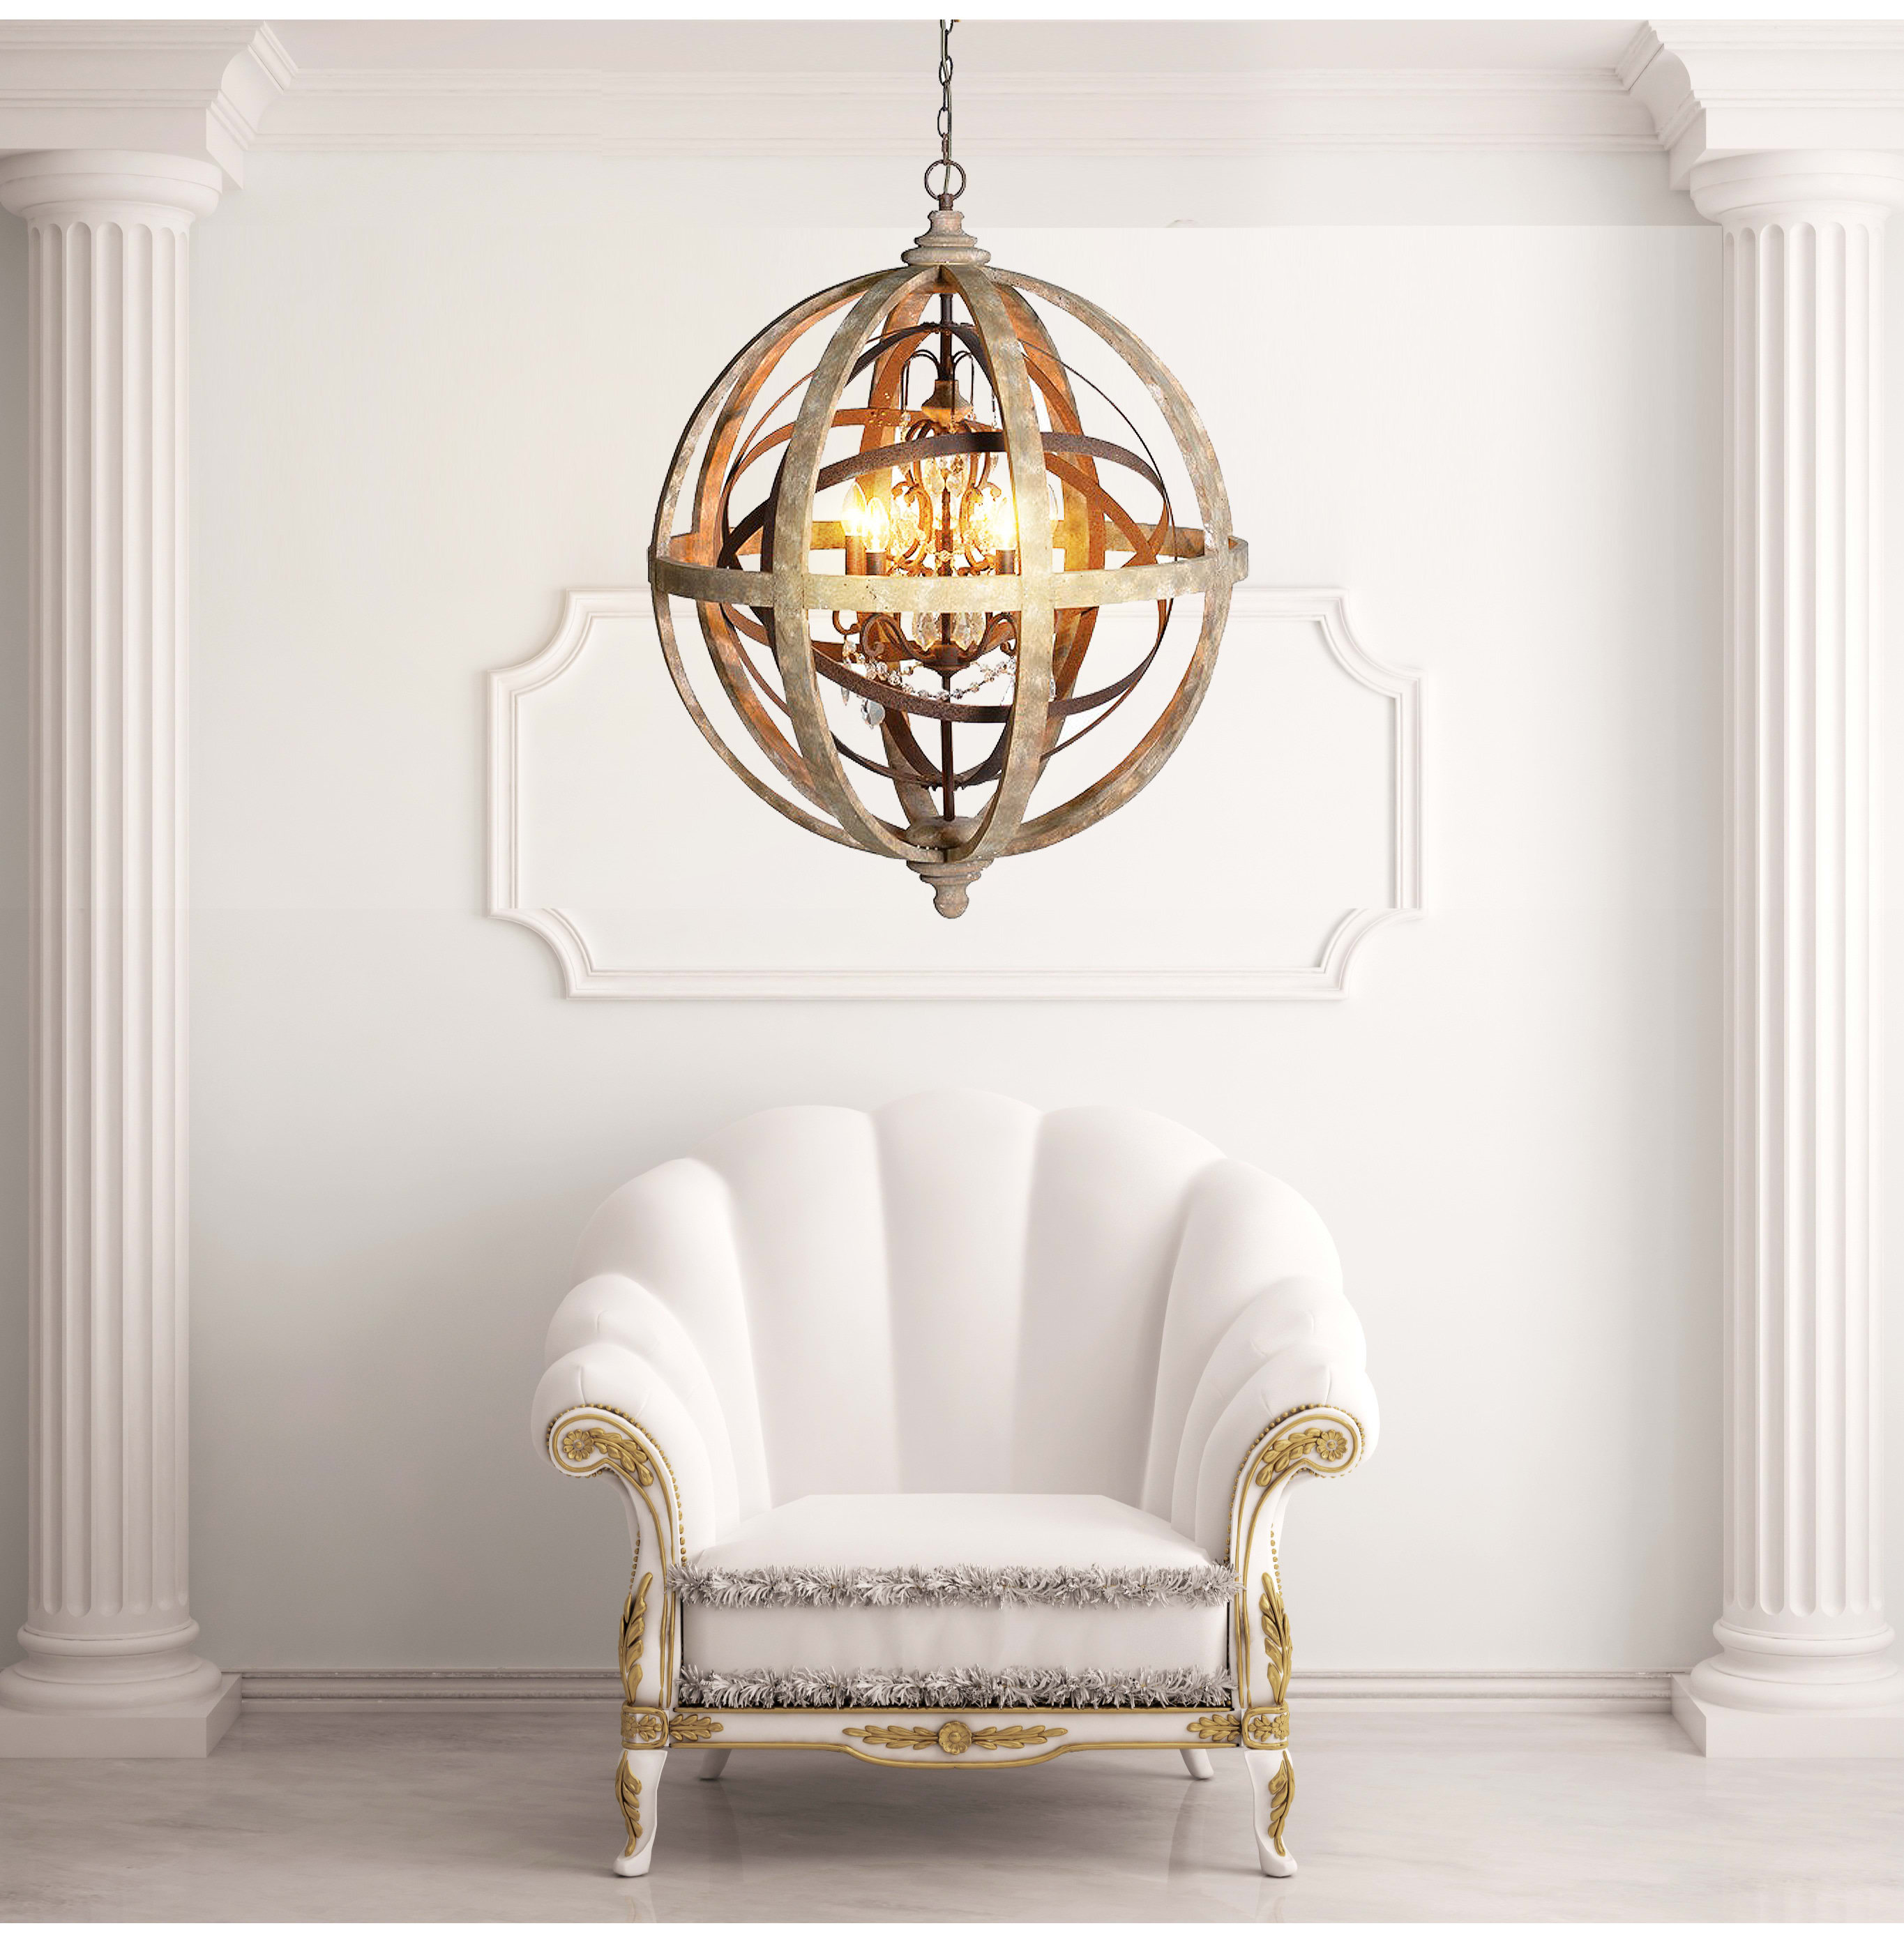 Large Open Globe with Crystal Chandelier